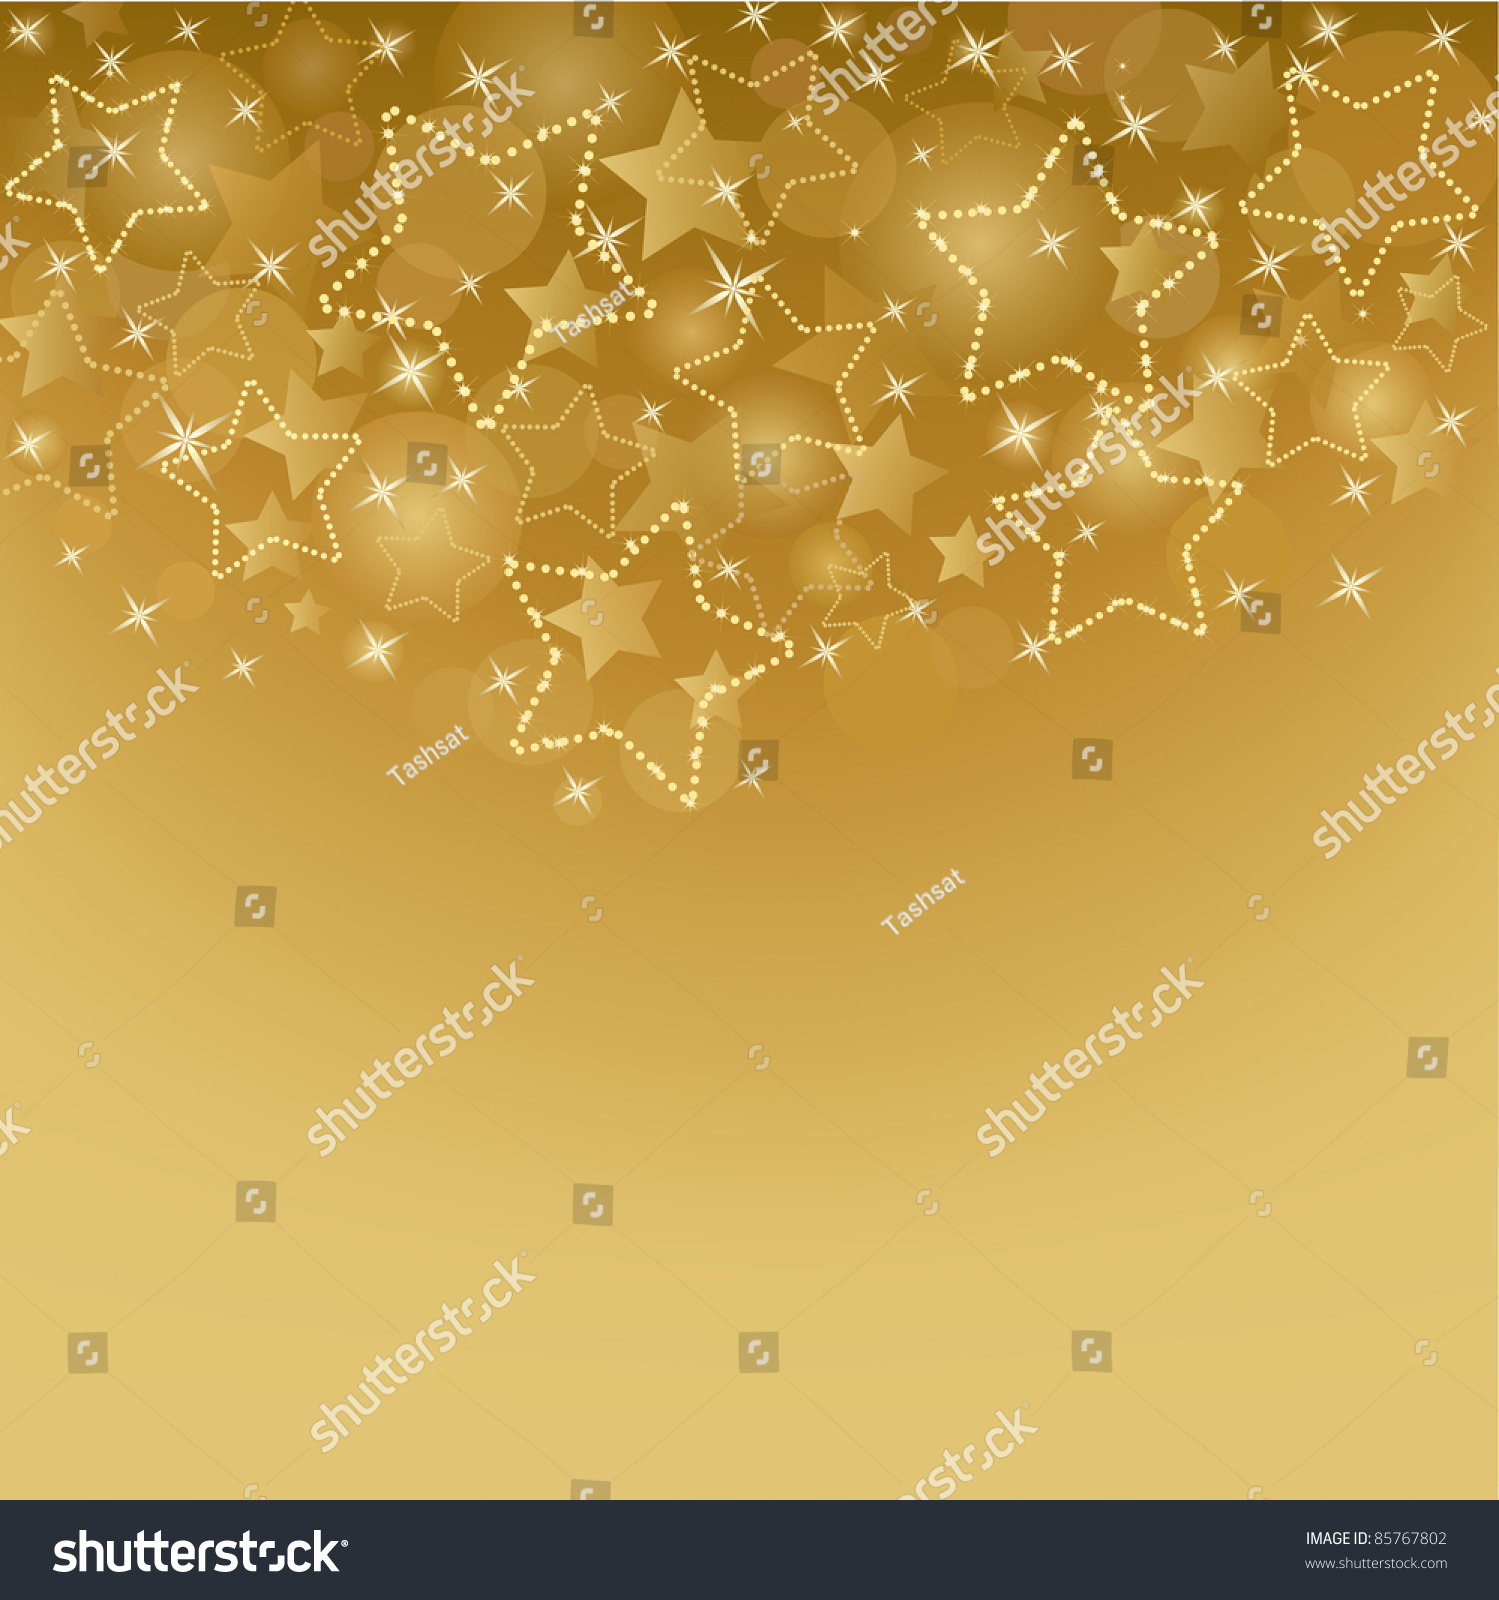 Gold Card With Stars Stock Vector Illustration 85767802 : Shutterstock